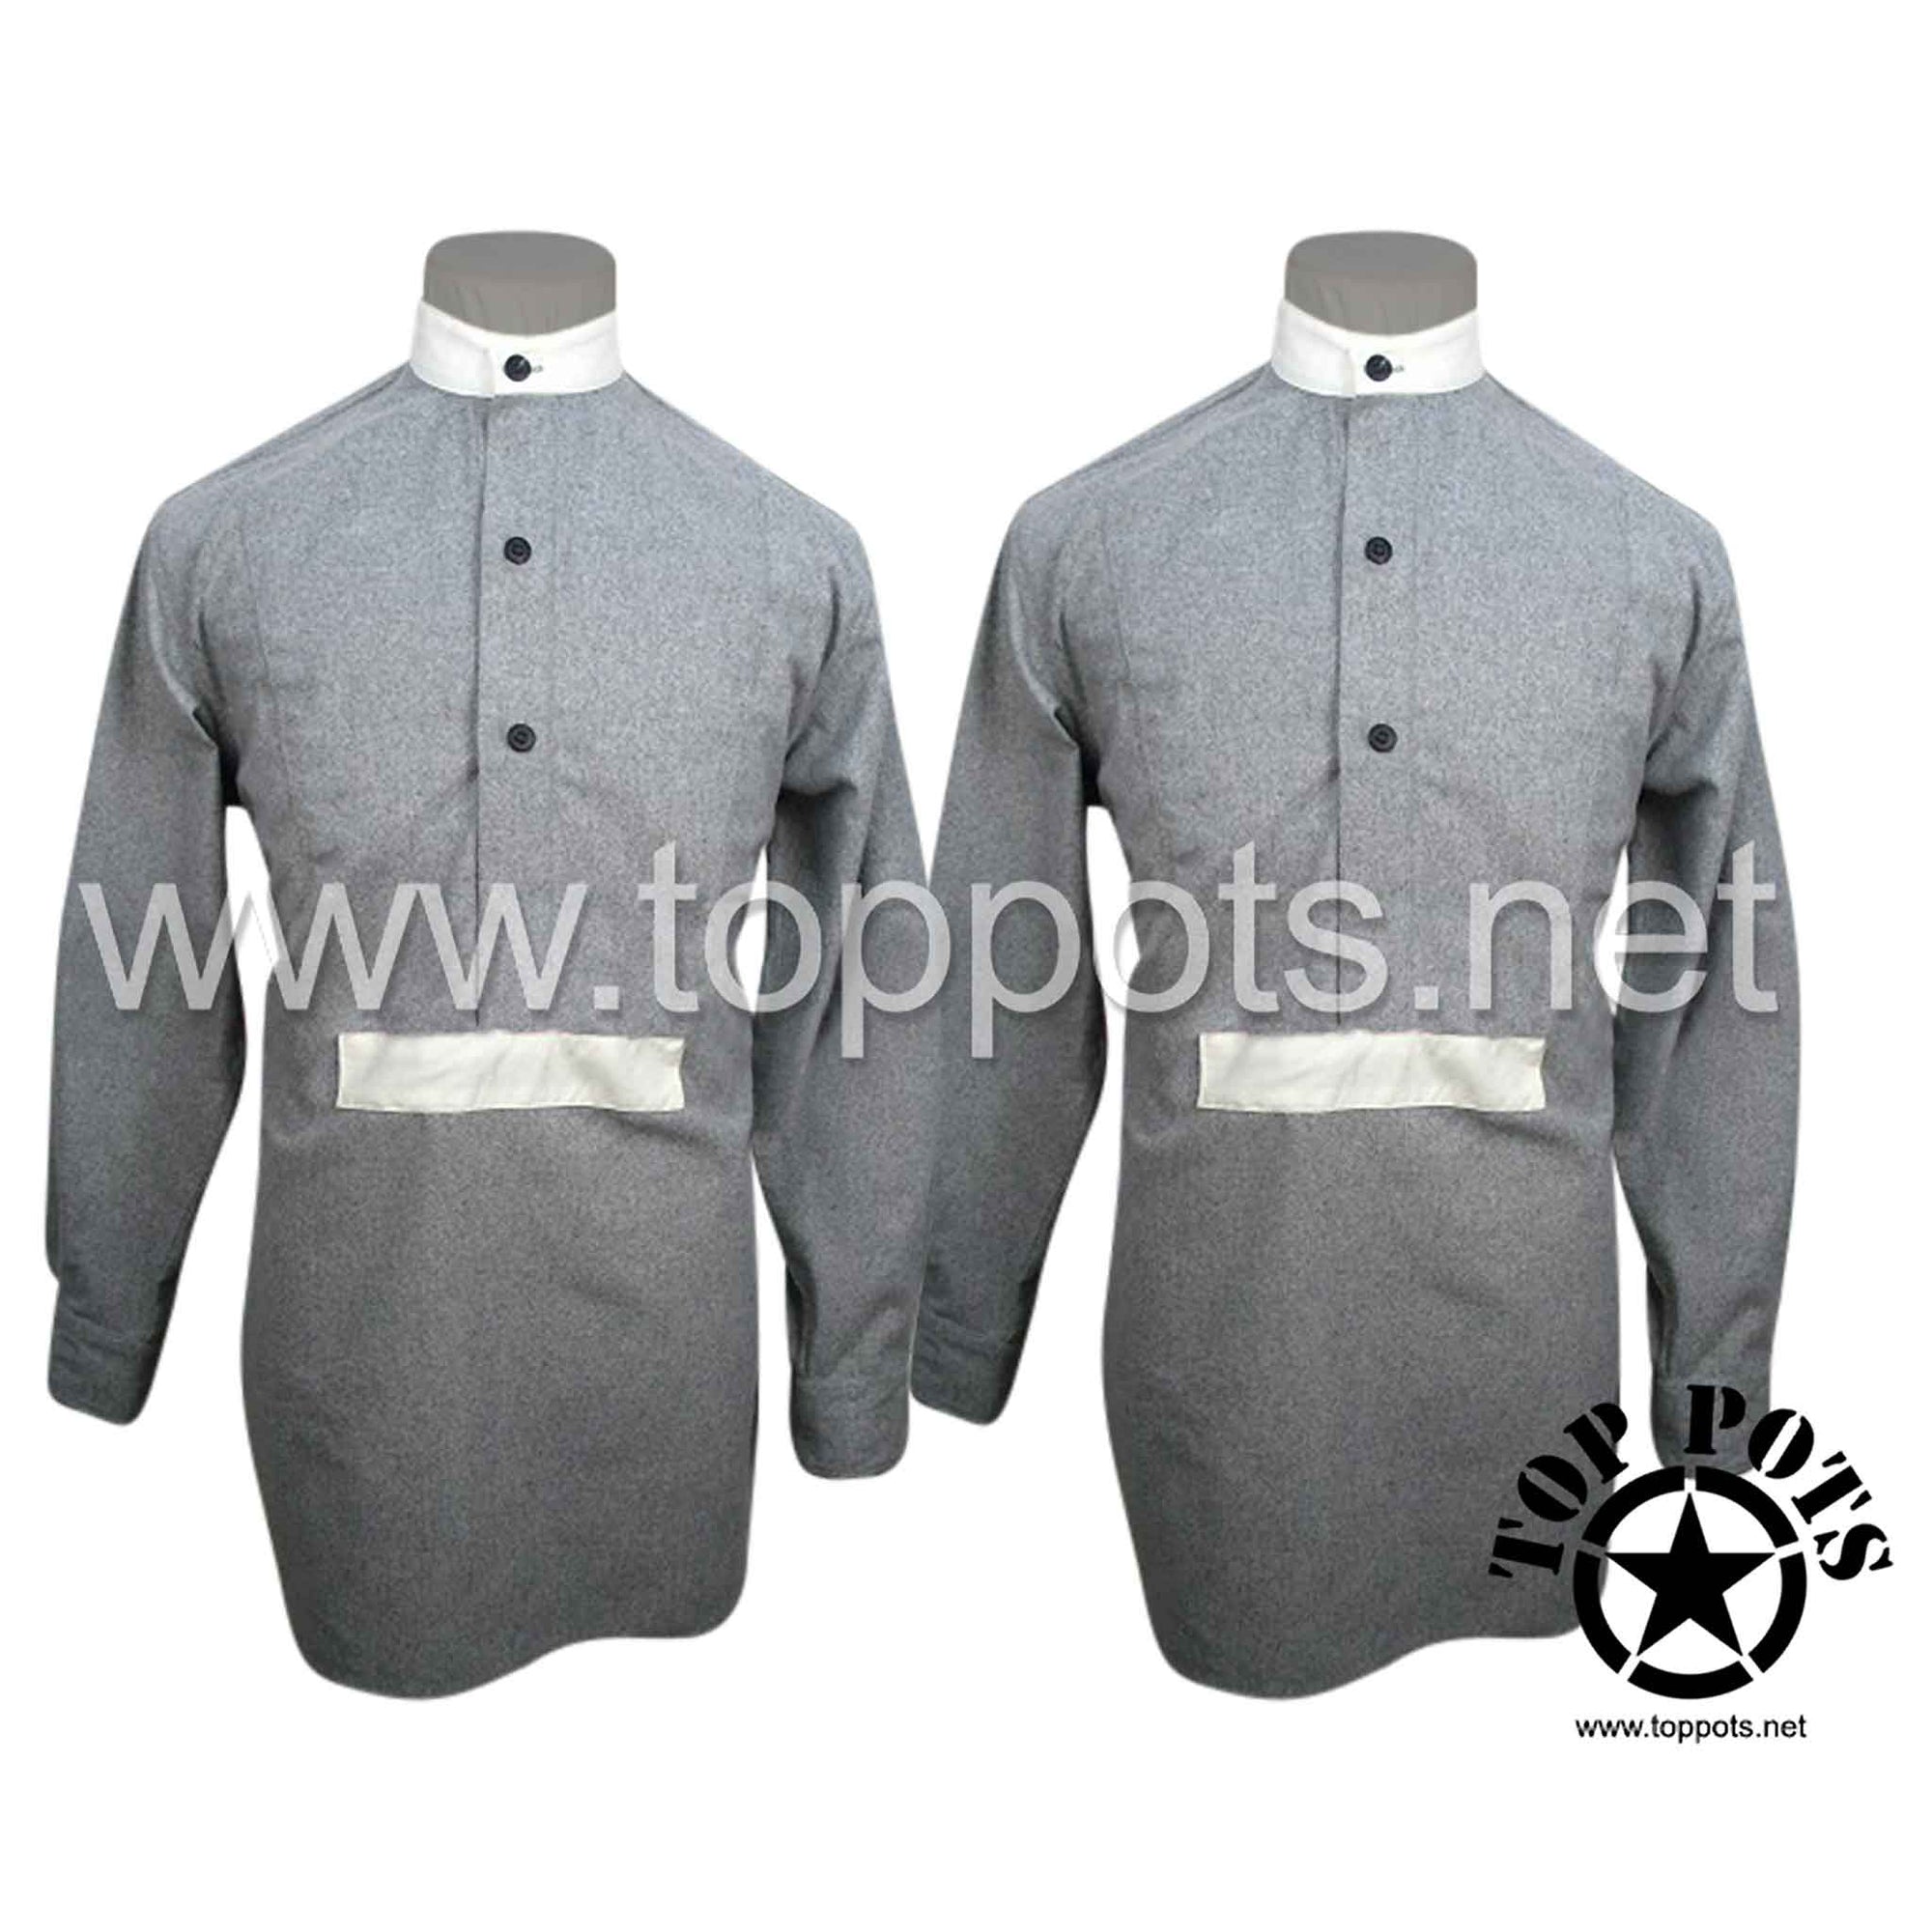 WWI British Army Reproduction Grey Wool Enlisted Uniform Collarless Service Shirt - Greyback